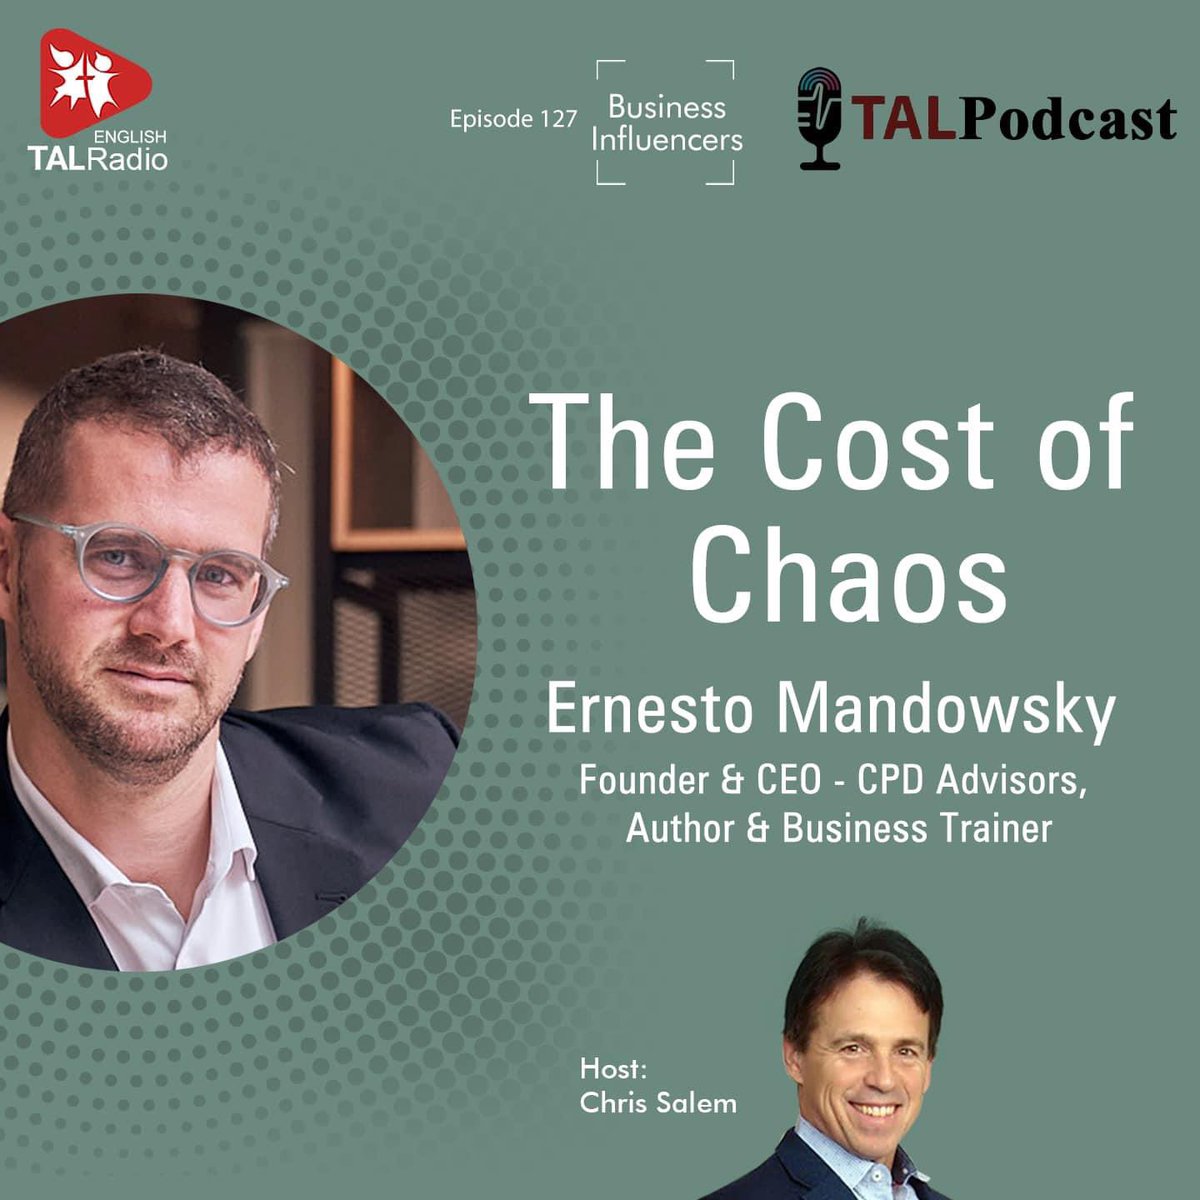 Business Influencers Podcast Ernesto Mandowsky🌐 🗓️ “The Cost of Chaos” 🎧 Listen on TAL Radio: v1.talgiving.org/api/v1/url/QW2… 🍏 Apple Podcasts: podcasts.apple.com/in/podcast/tal… 🎵 Spotify: open.spotify.com/episode/7nwP0r… 📺 YouTube: youtu.be/jUyld48En4U #BusinessInfluencers @talradioenglish